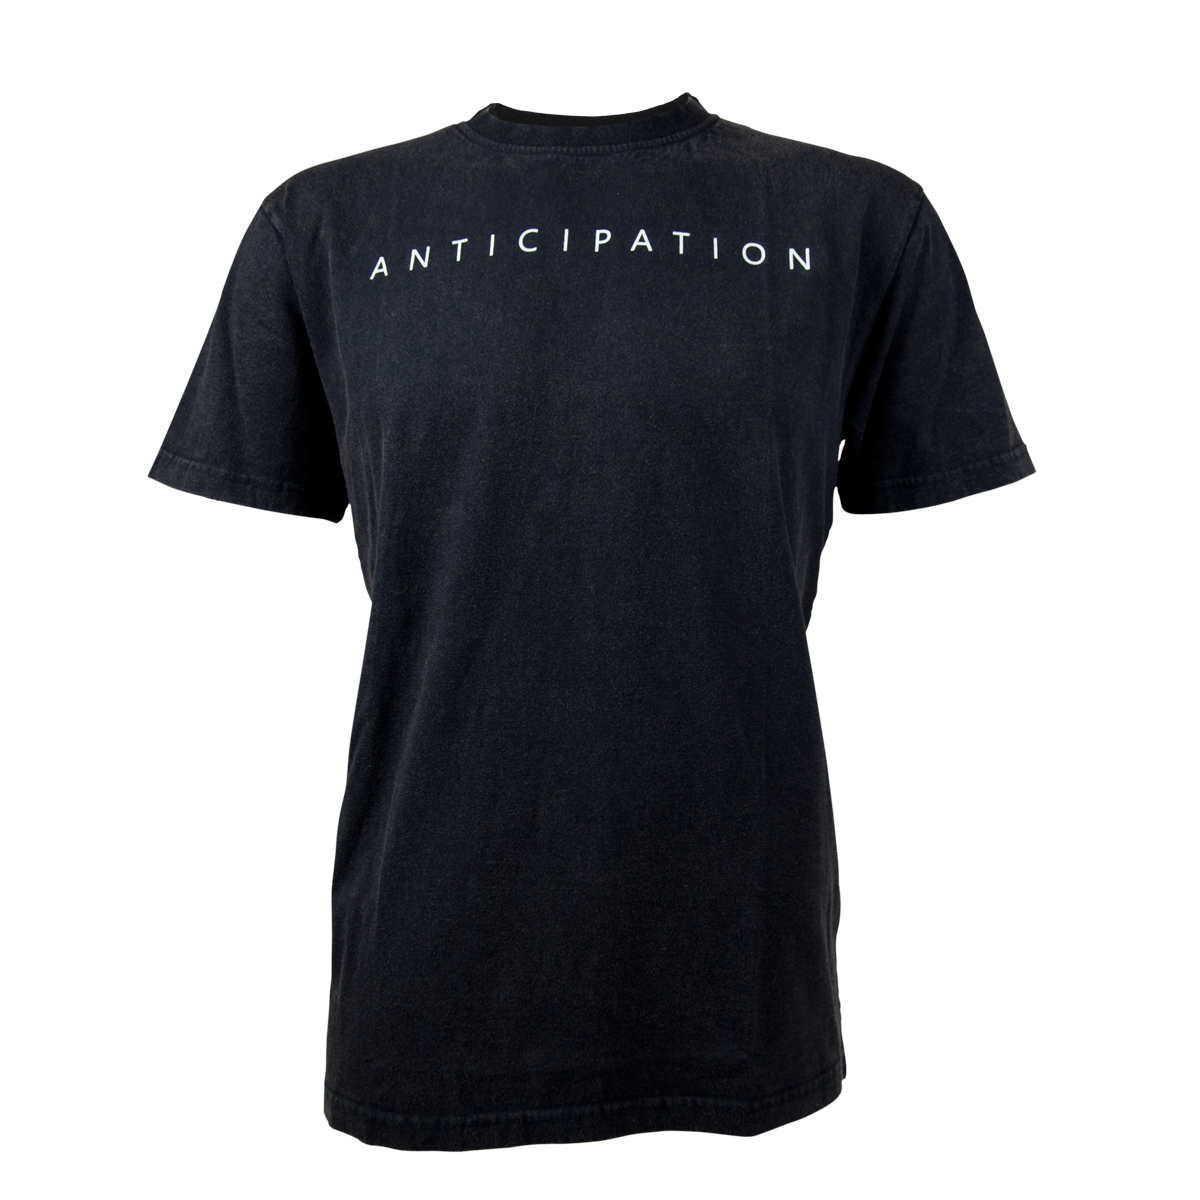 A Guinness Premium Vintage Turtle Back Graphic Tee with the word antification on it, featuring a distressed effect.